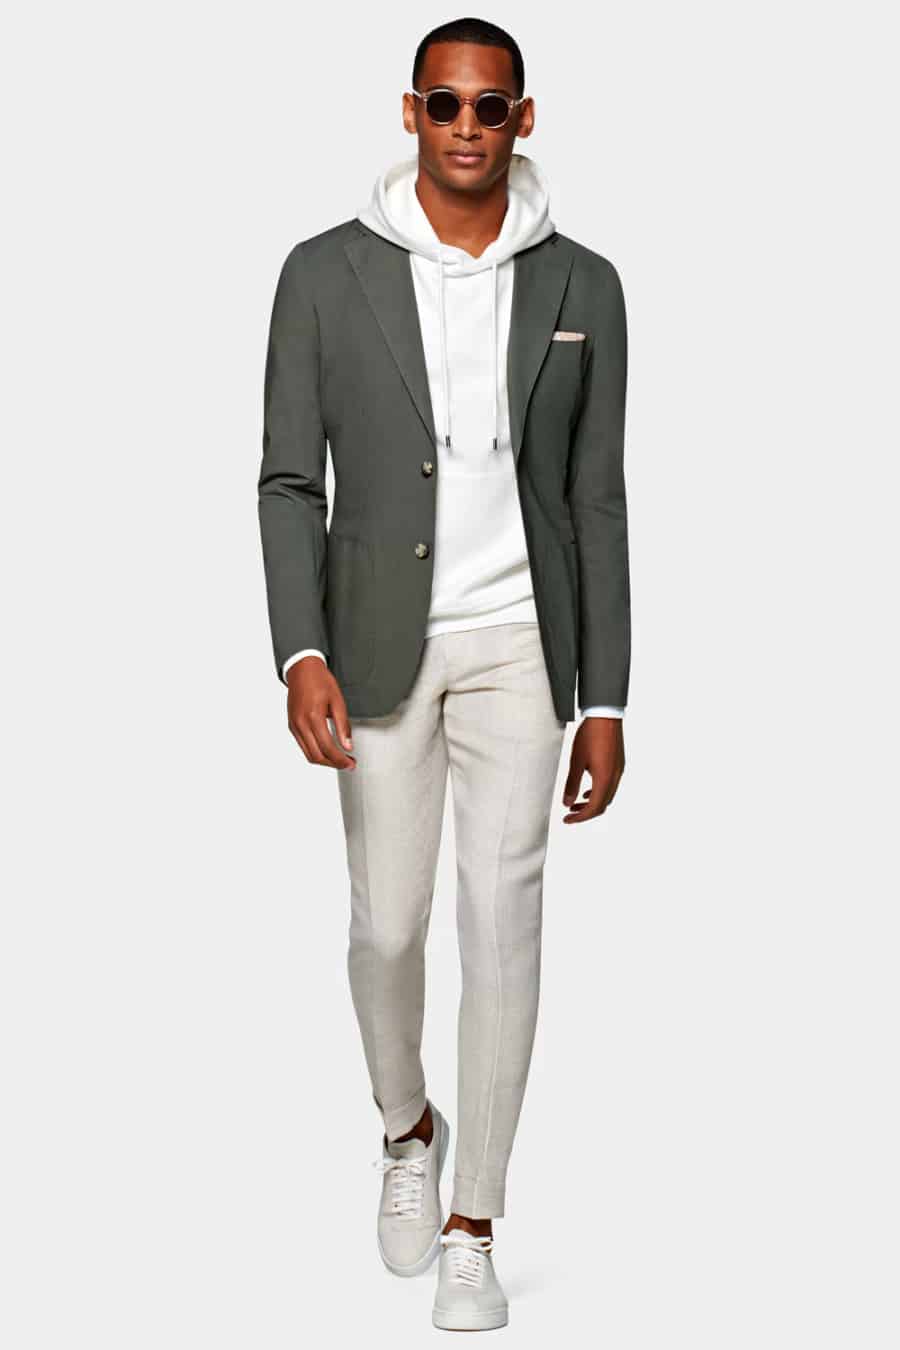 Men's grey trousers, white hoodie, green unstructured blazer and white sneakers outfit